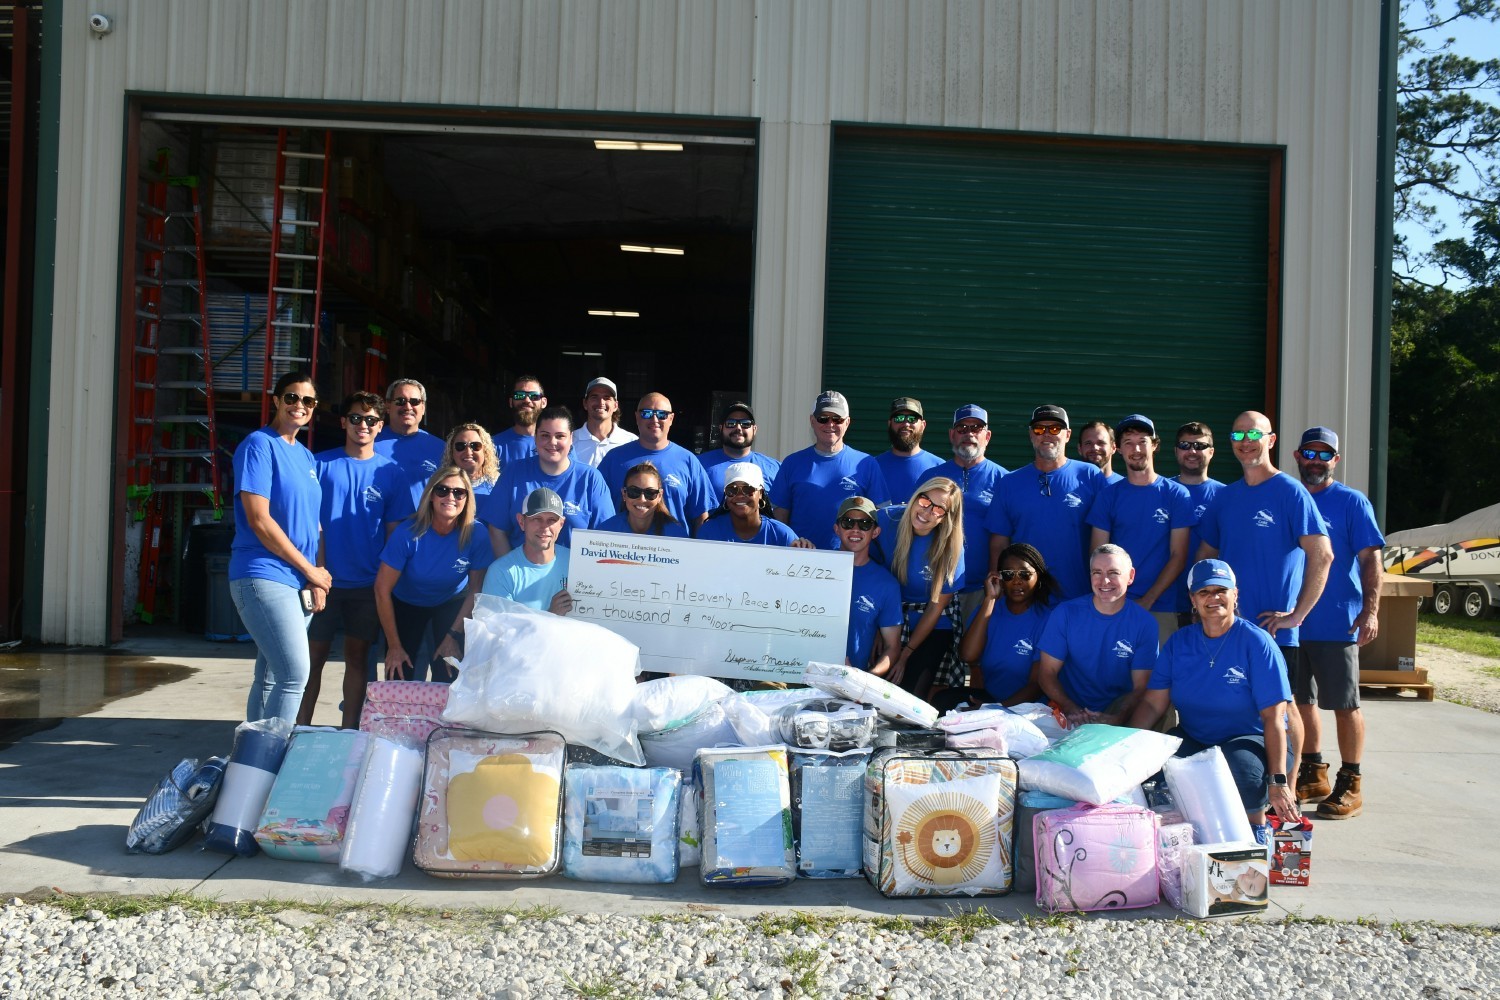 The Jacksonville team hosts a bed linens drive